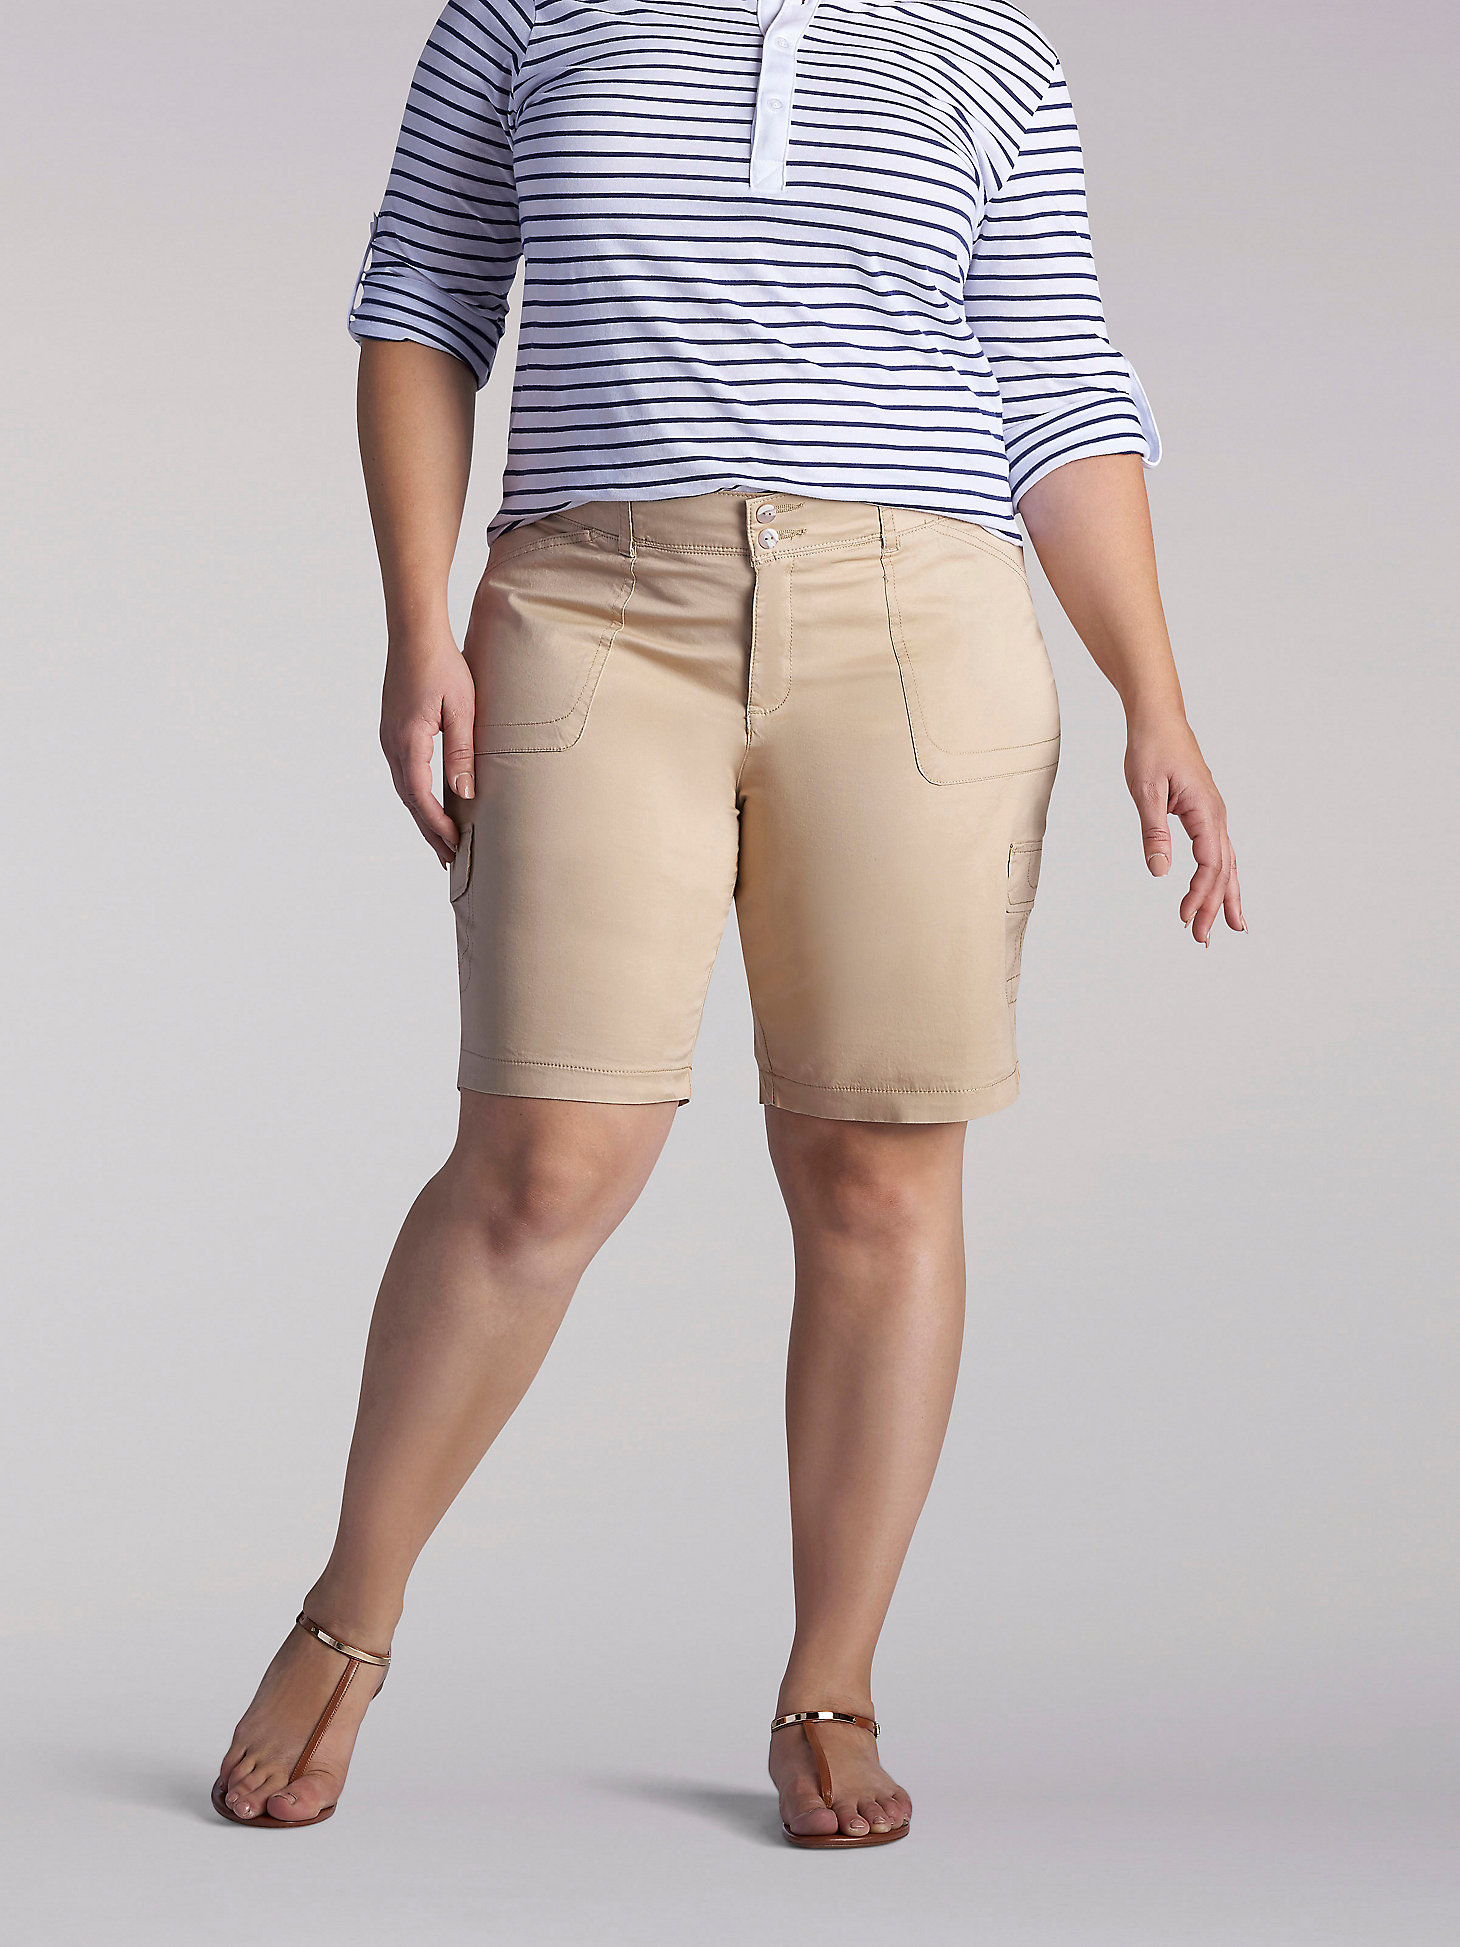 Women’s Relaxed Fit Avey Knitwaist Cargo Bermuda (Plus) in Cafe main view